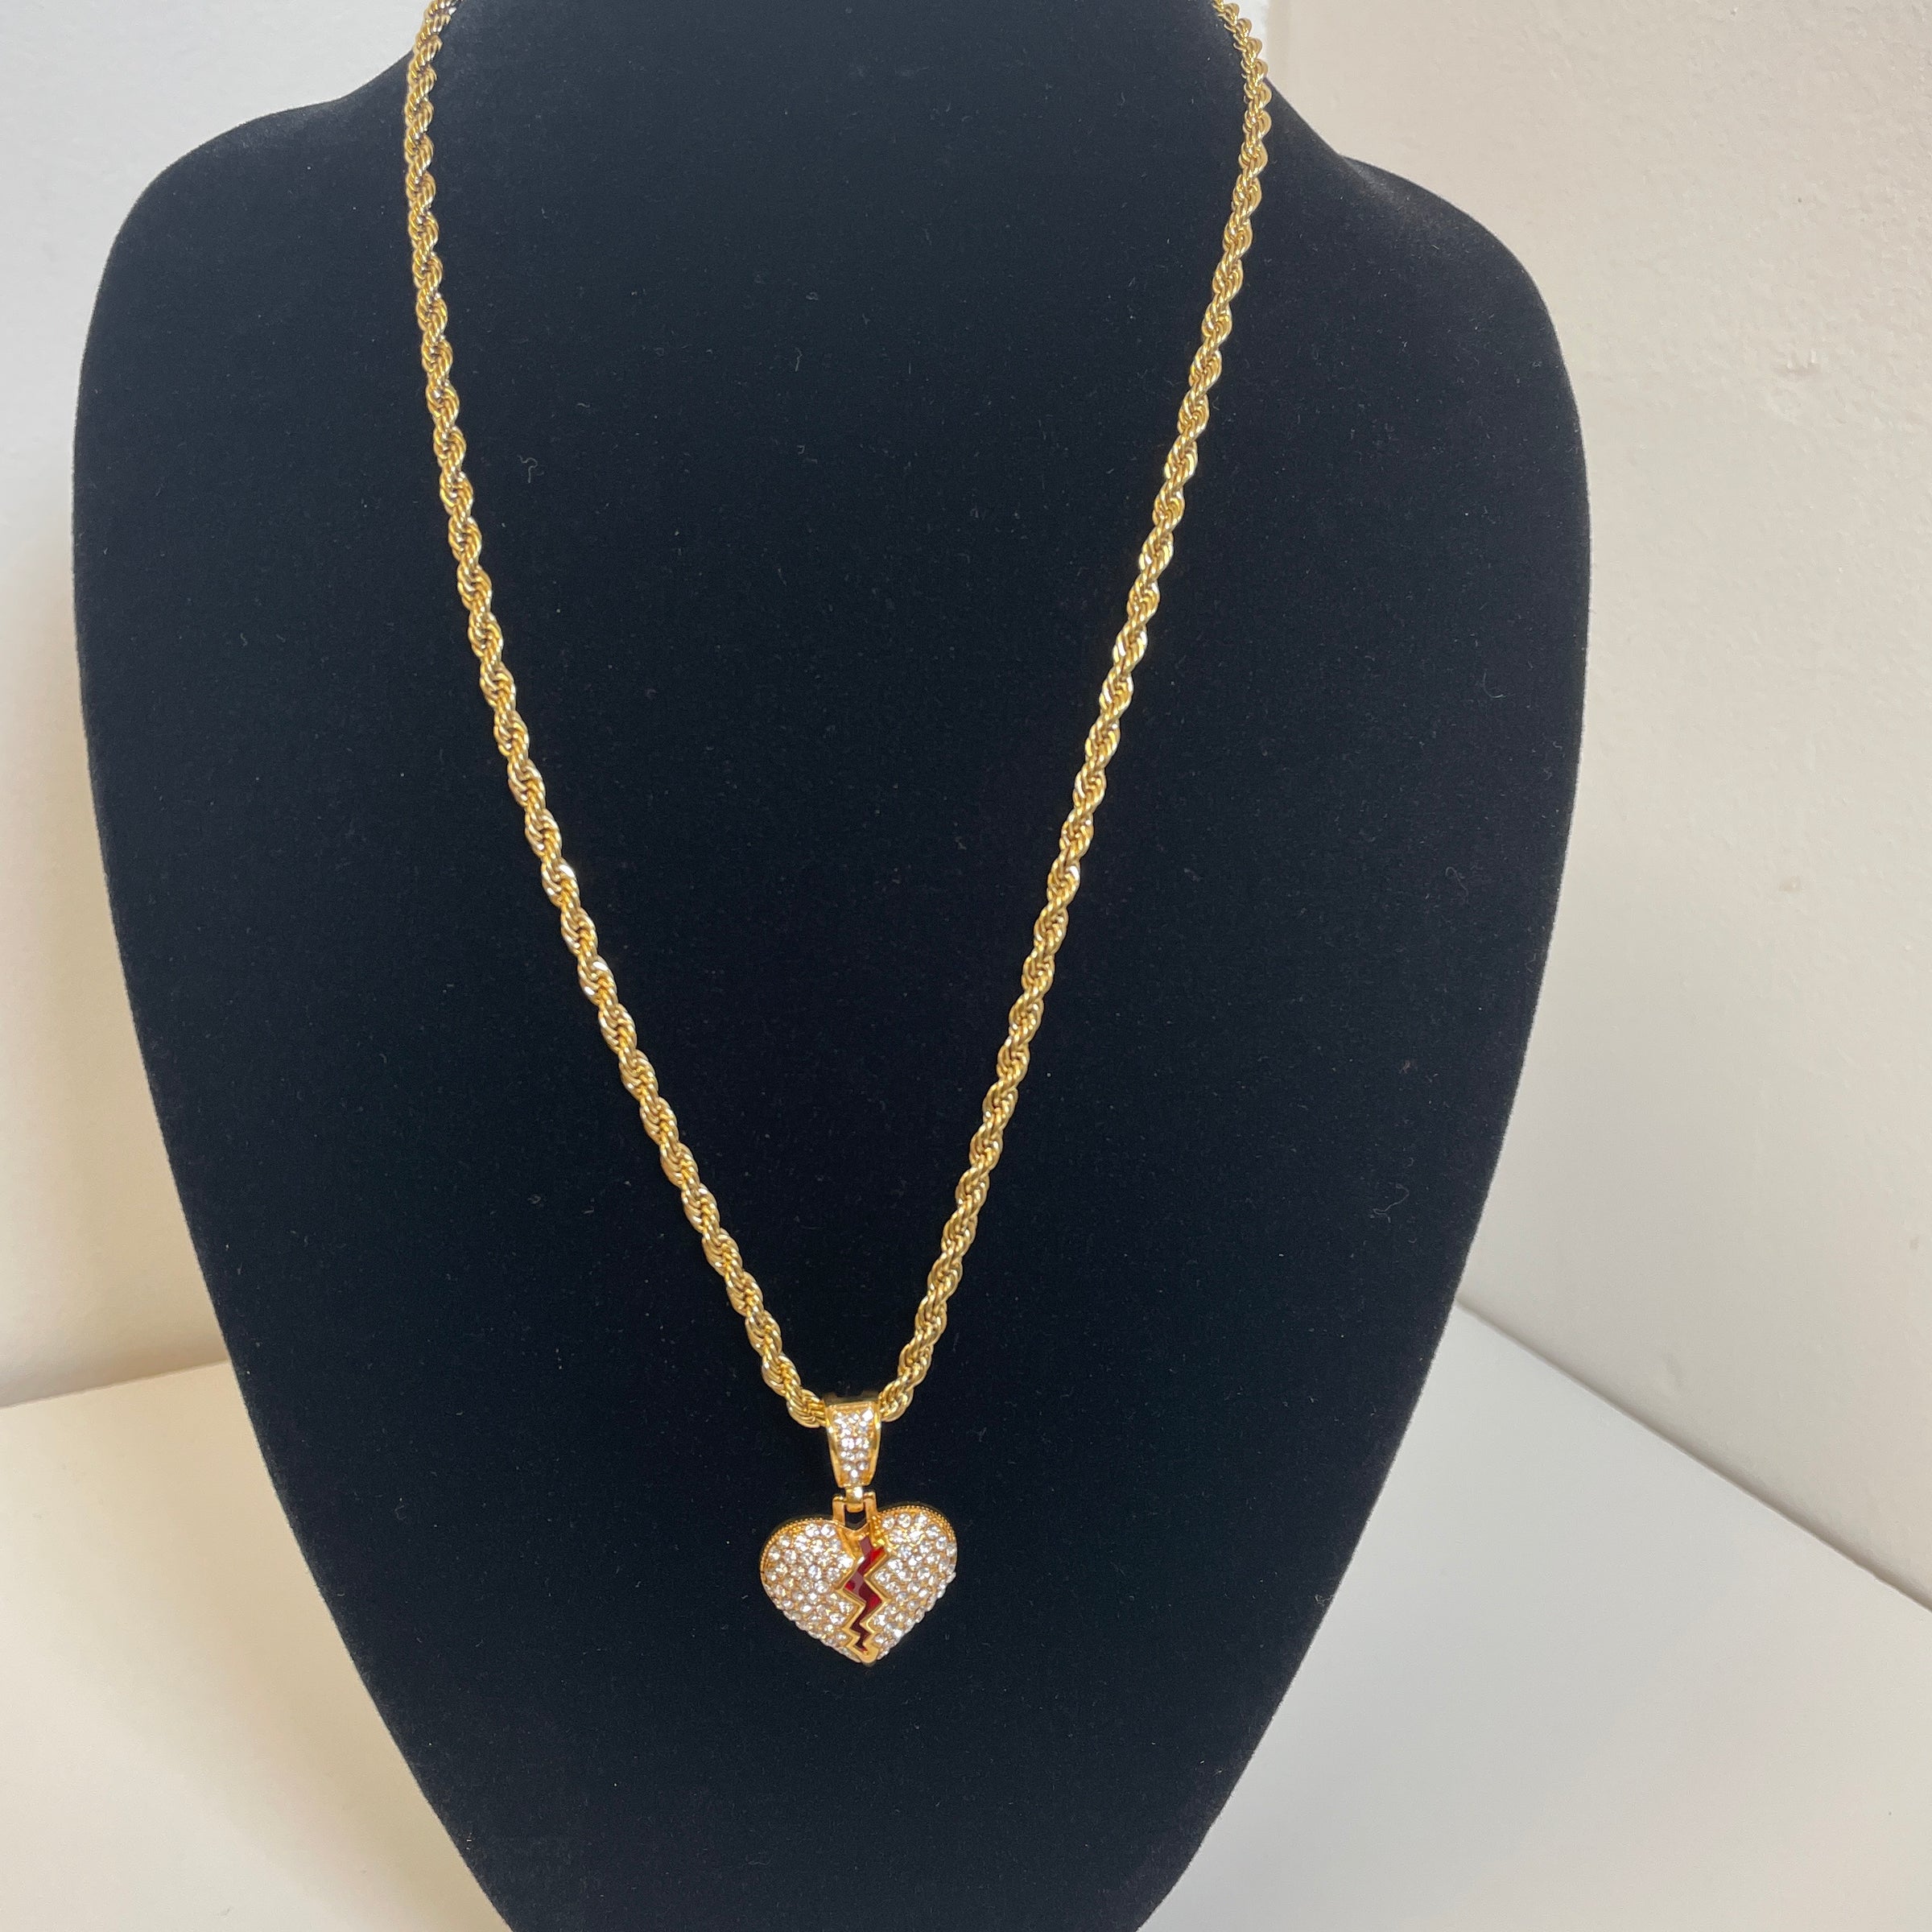 Red Broken Heart Pendant with 14K Gold Filled Rope Necklace 4mm 24" Chain Set